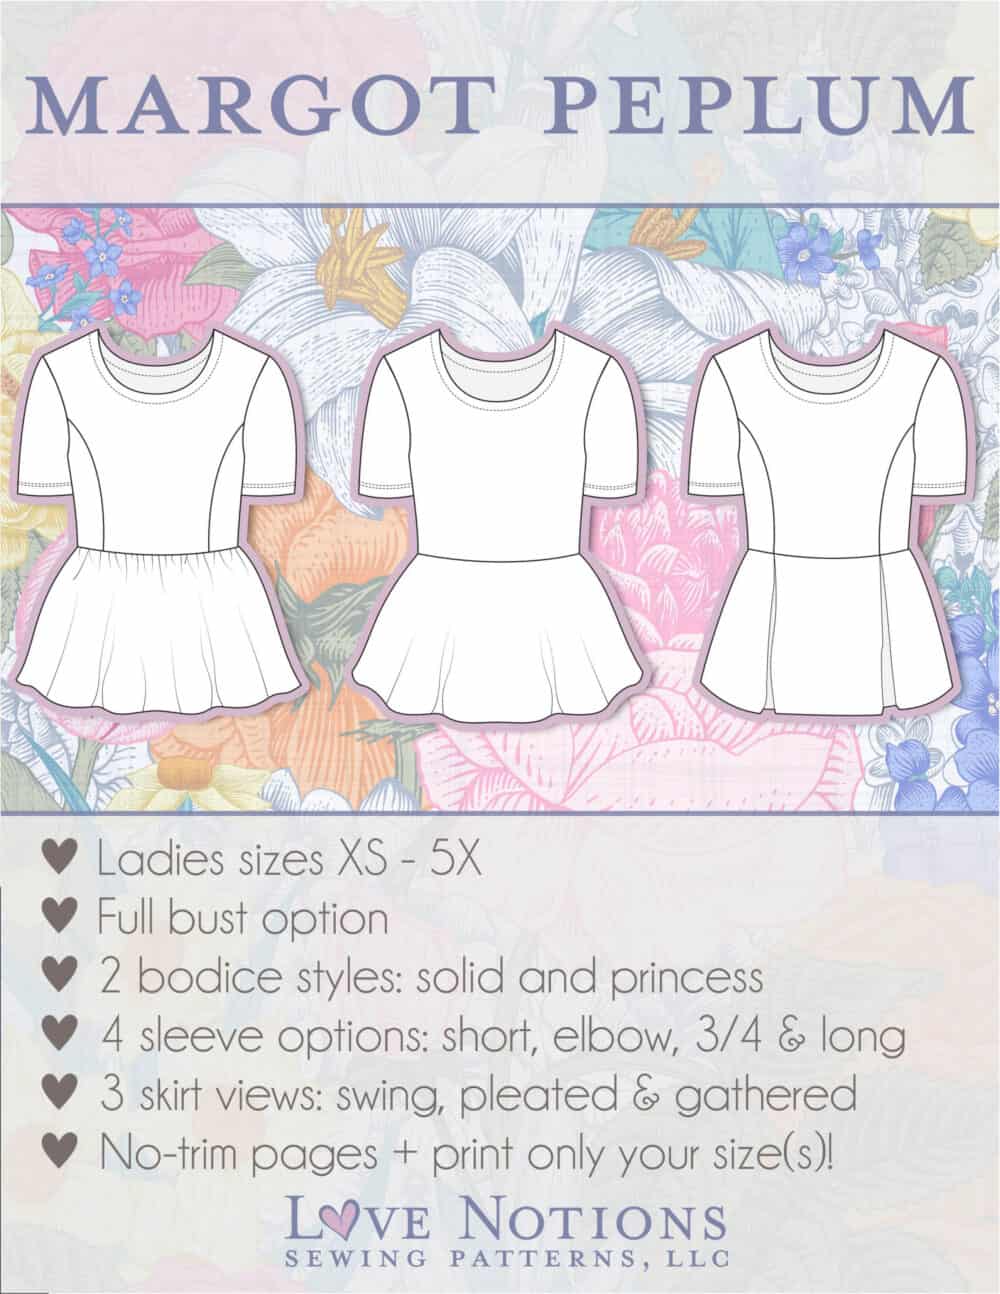 Princess seamed peplum pattern for sewing Love Notions.